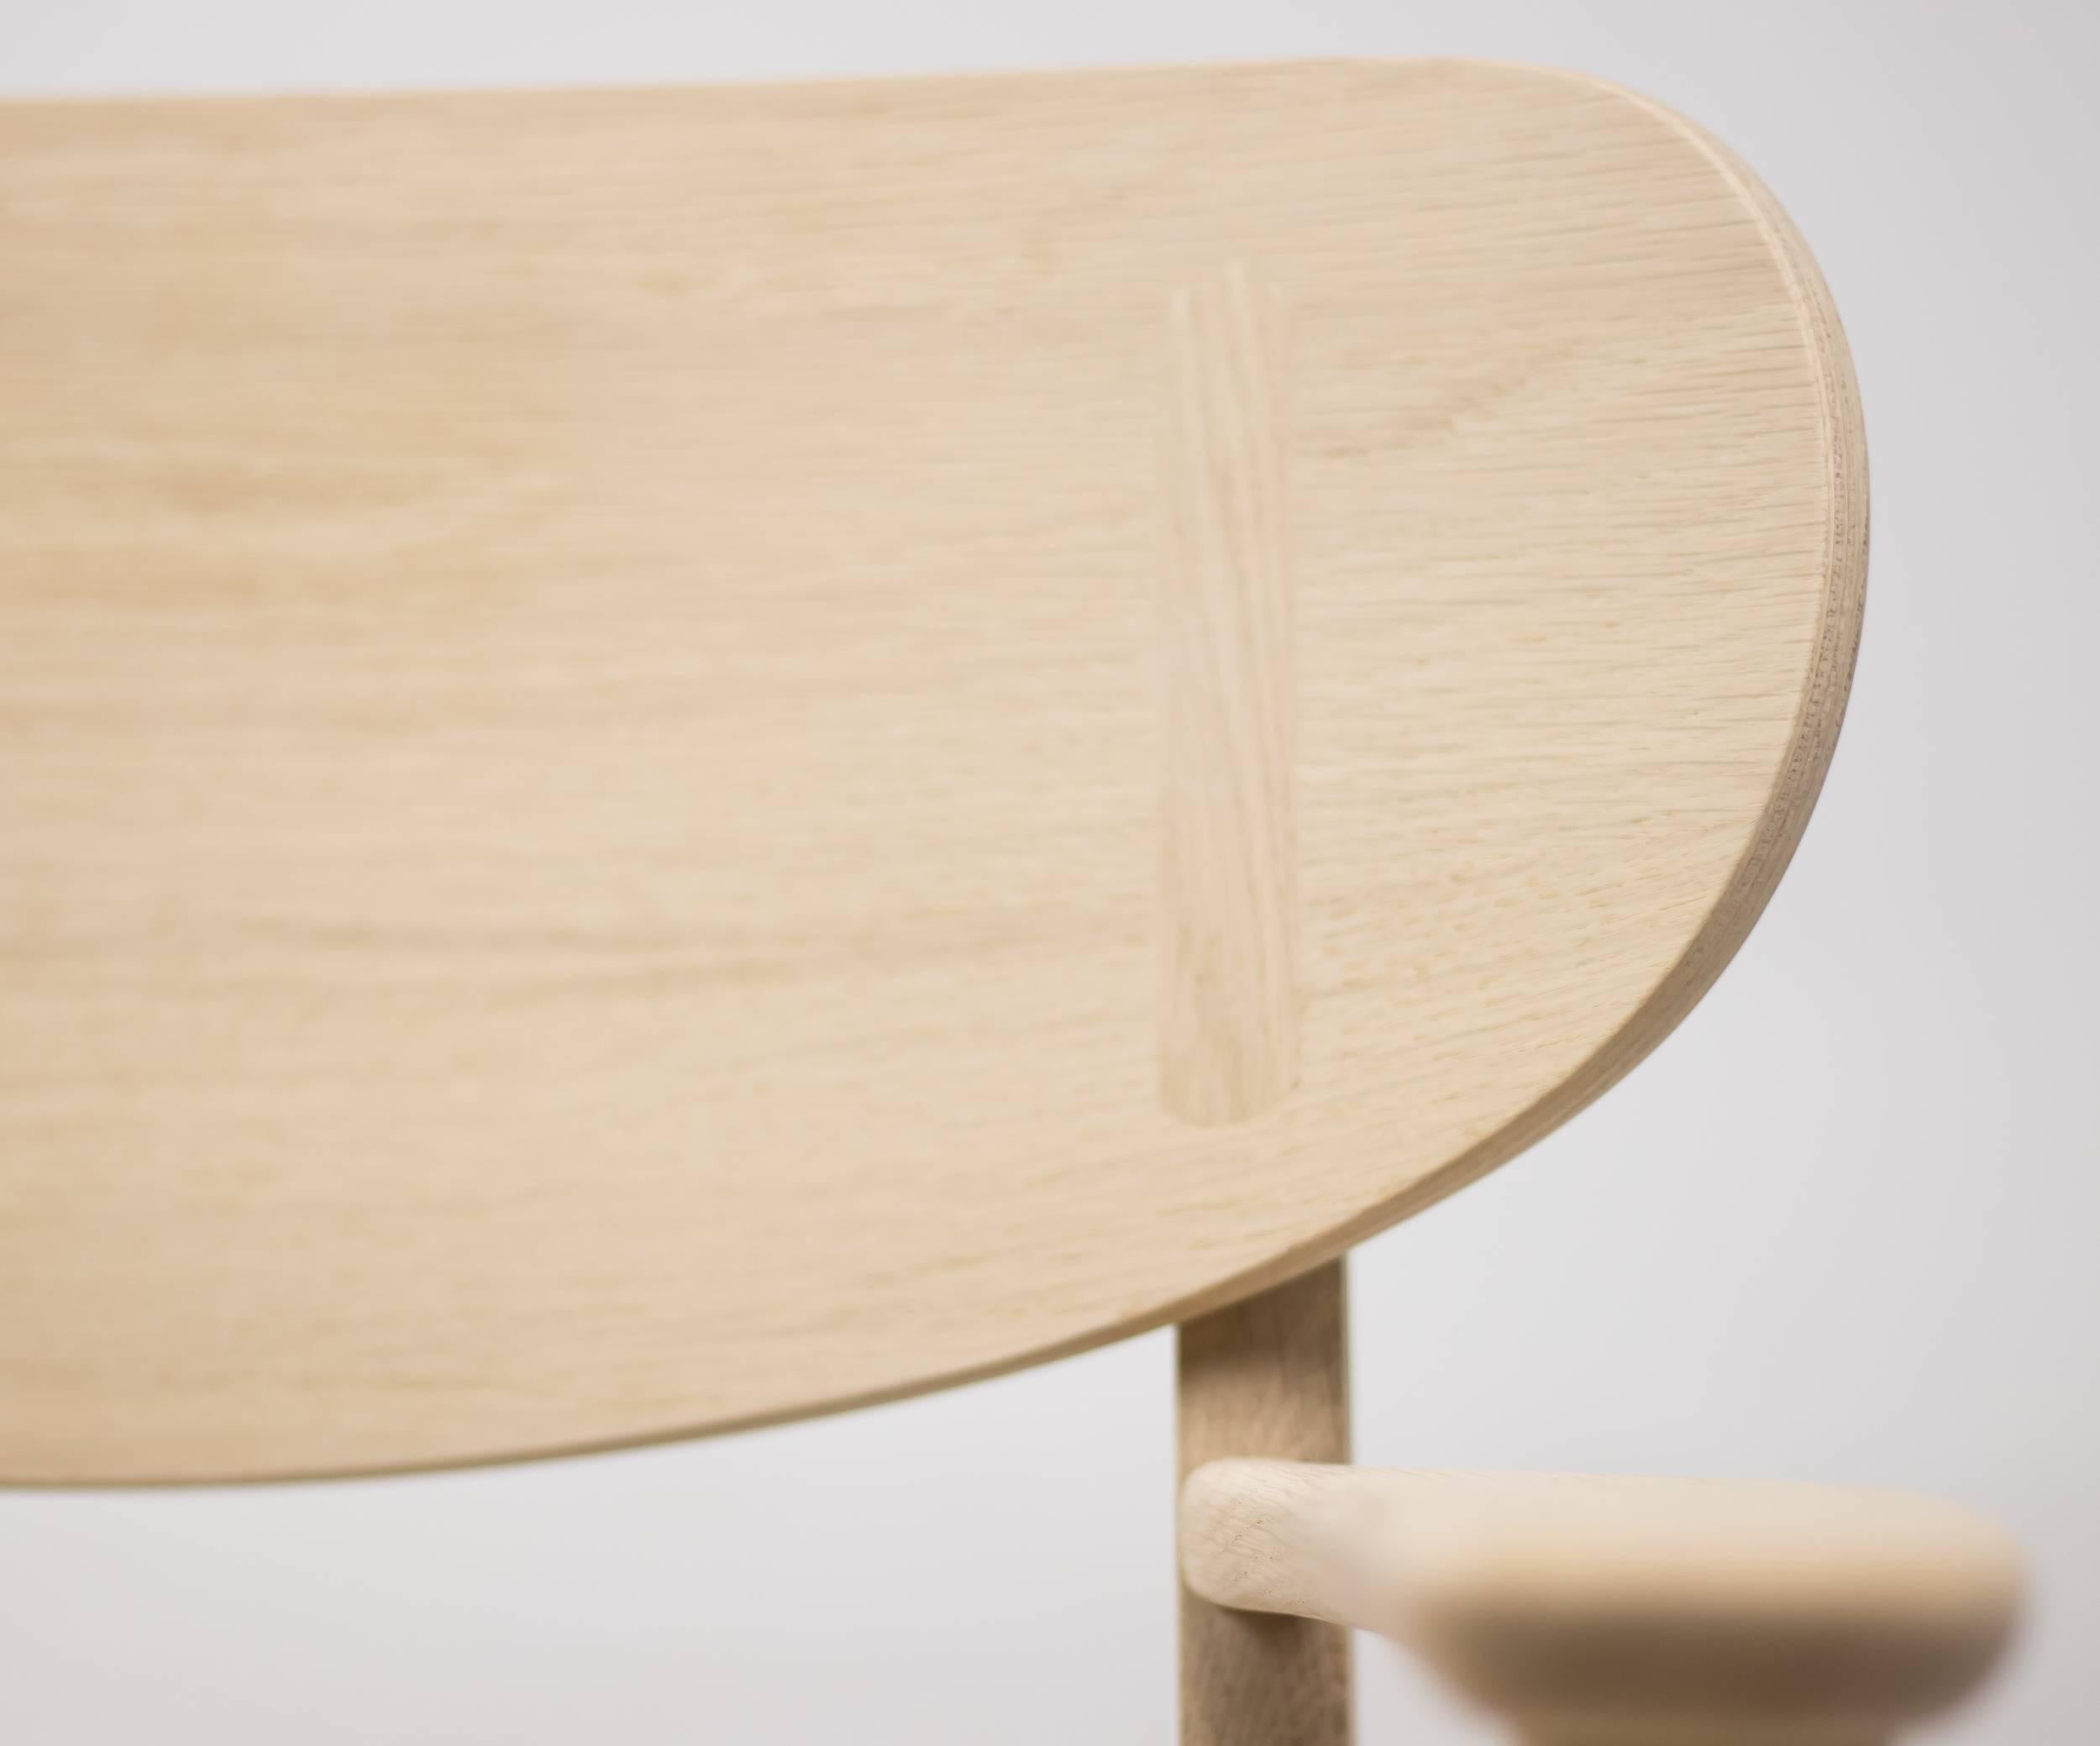 A special limited edition, engraved with the official reissue date and Hans J. Wegner’s signature, of the CH22 lounge chair soap-treated oak. The chair has a complex structure with a solid wood frame and a distinctively moulded, organically shaped